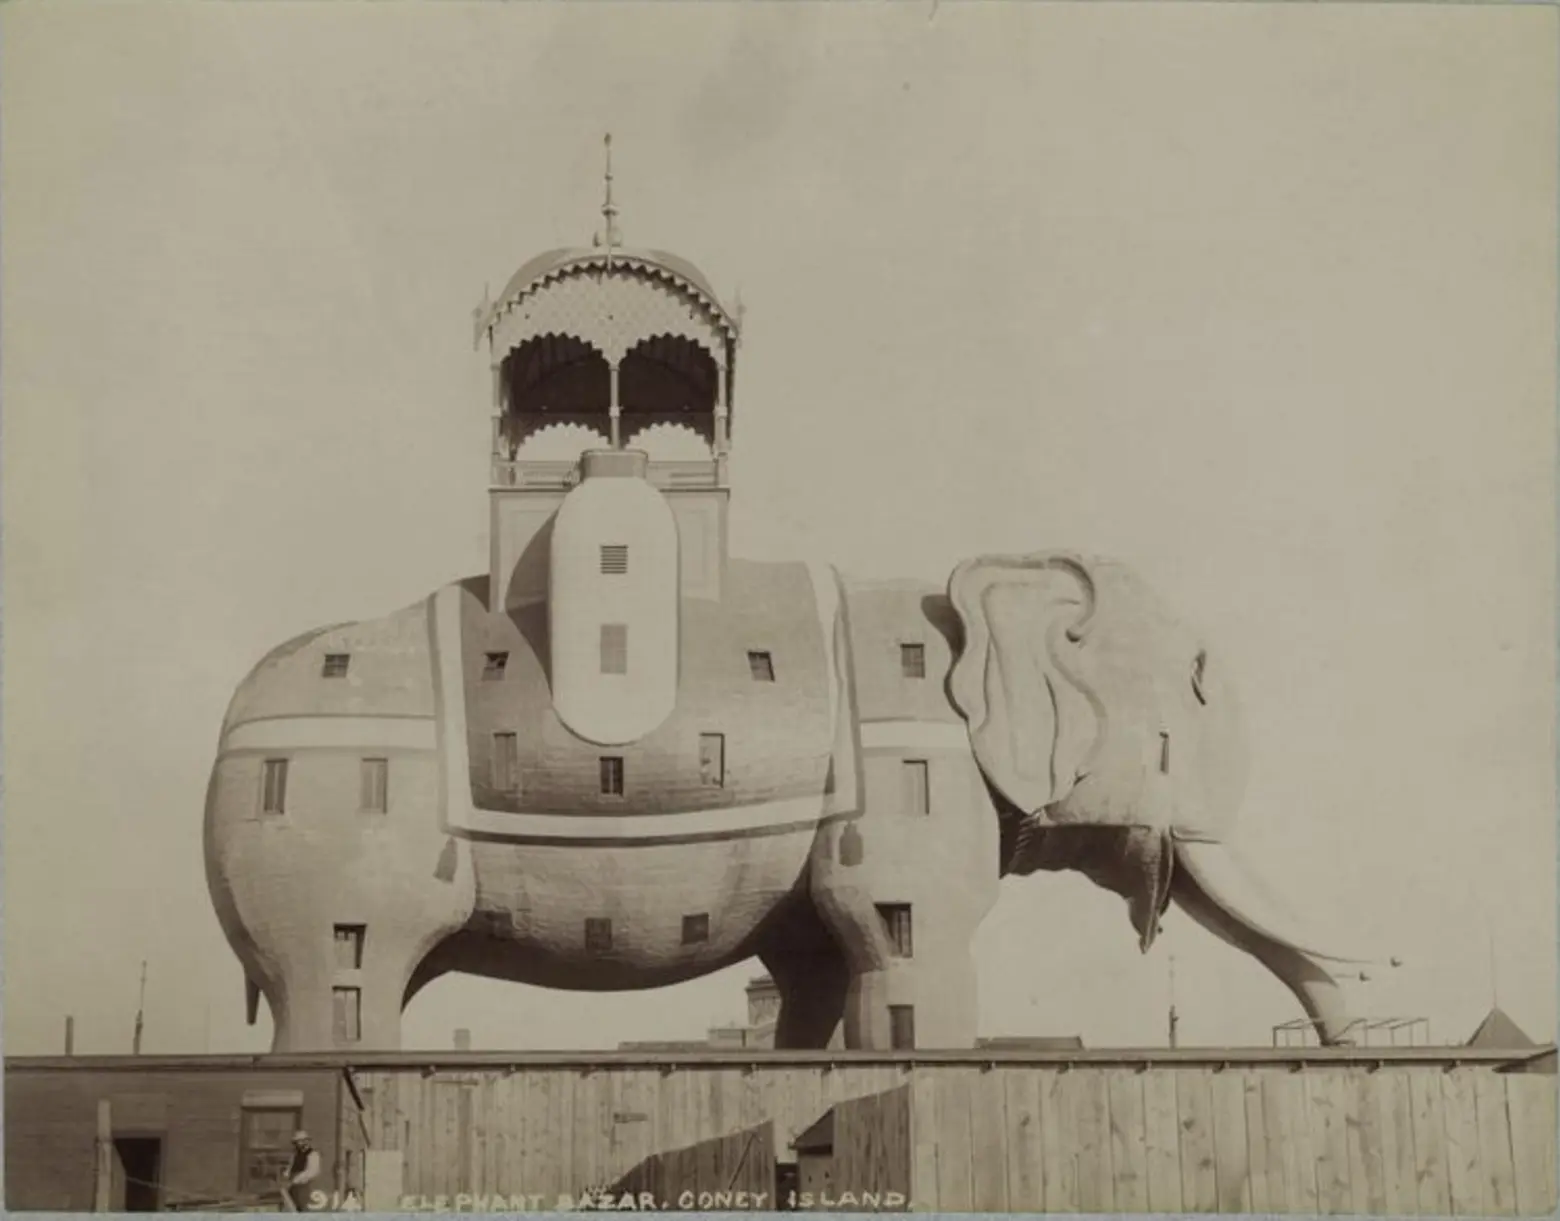 The sordid, surreal, and spectacular history of Coney Island’s Elephant Hotel